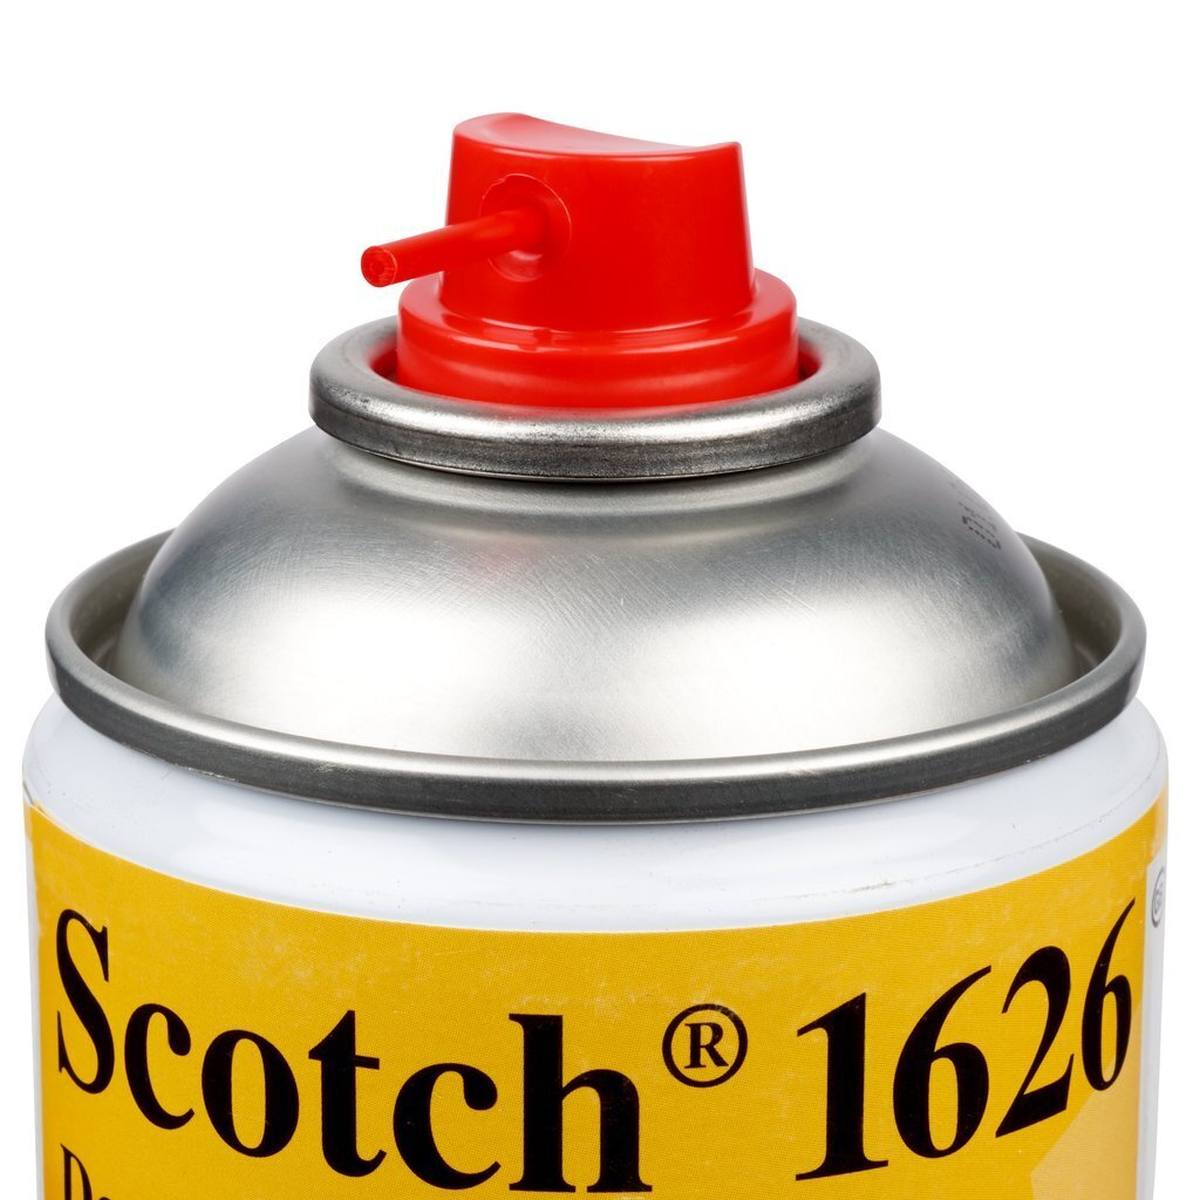 3M Scotch 1626 Cleaning and degreasing spray, 400 ml